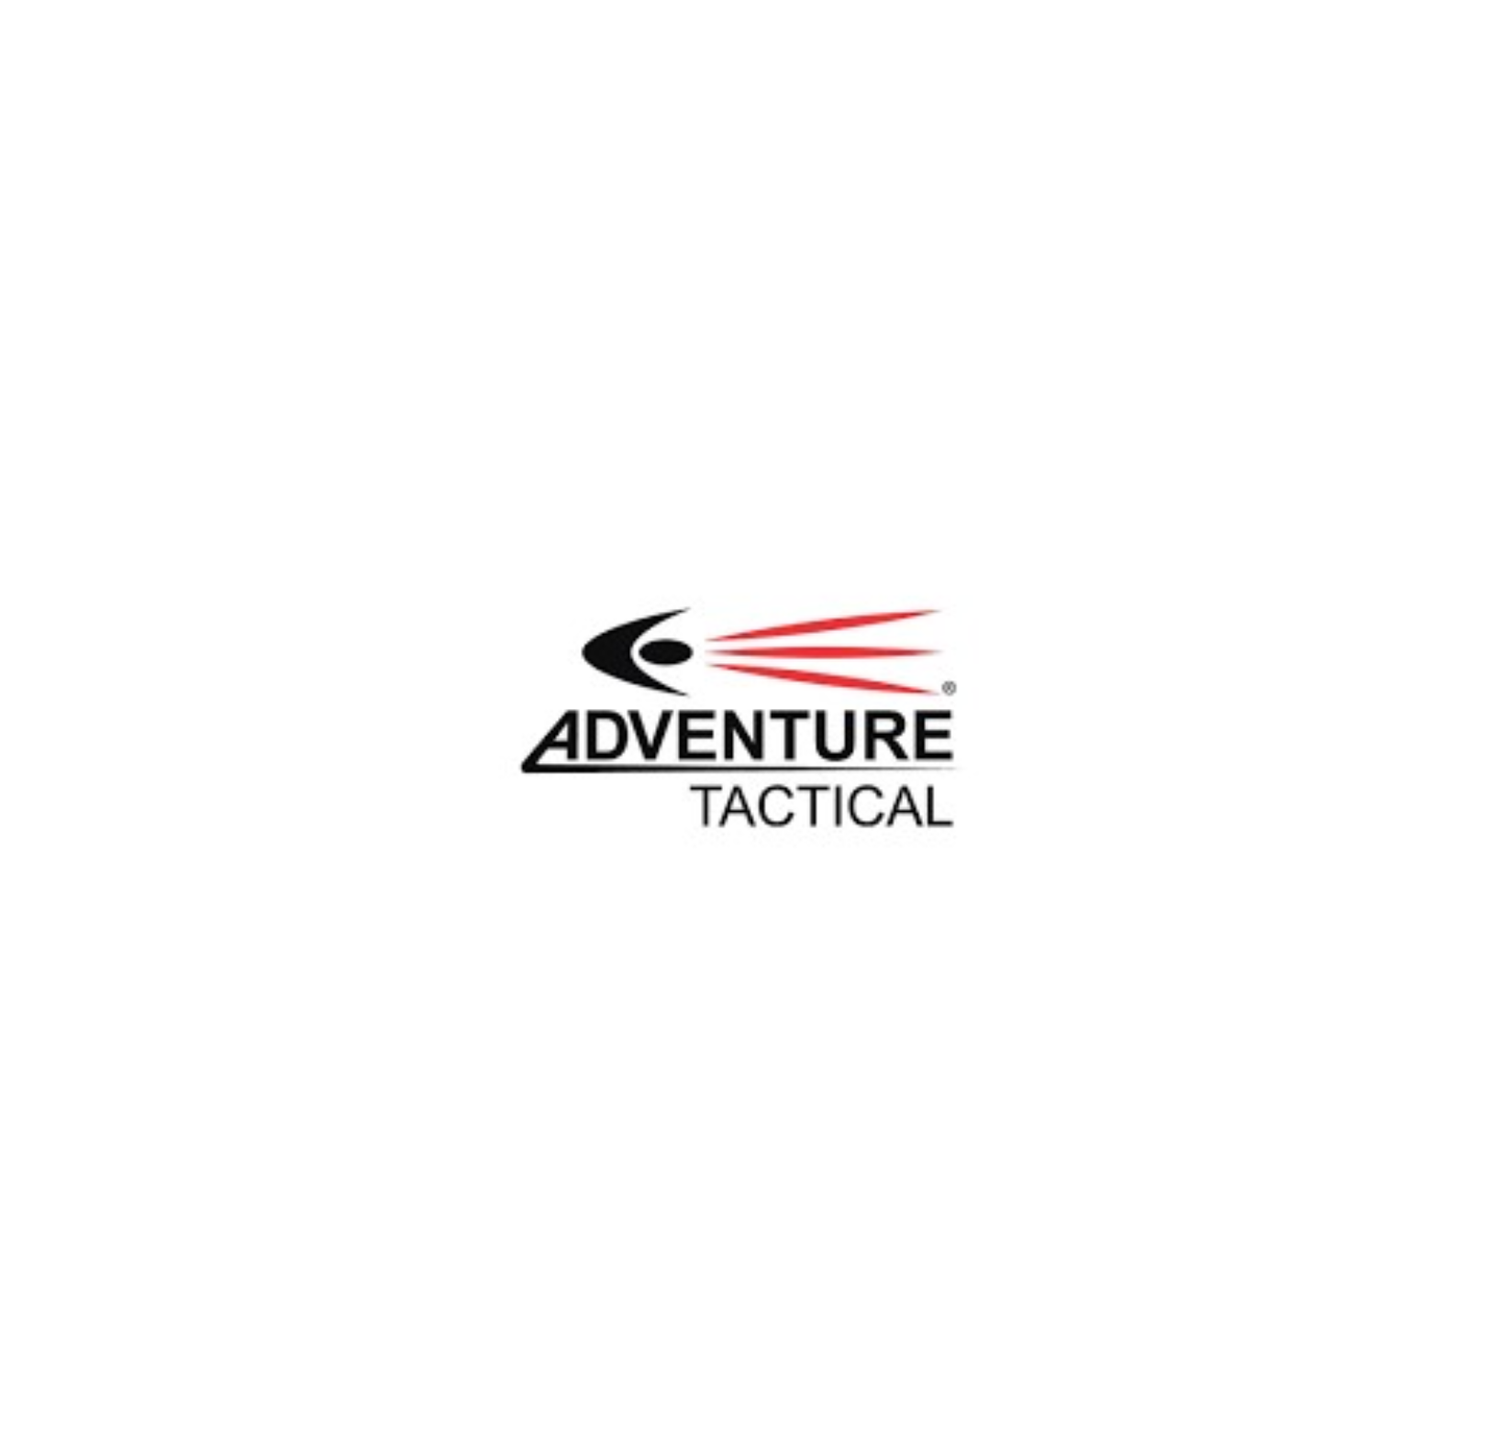 Copoint Supplier of Adventure Tactical Signal Lighting